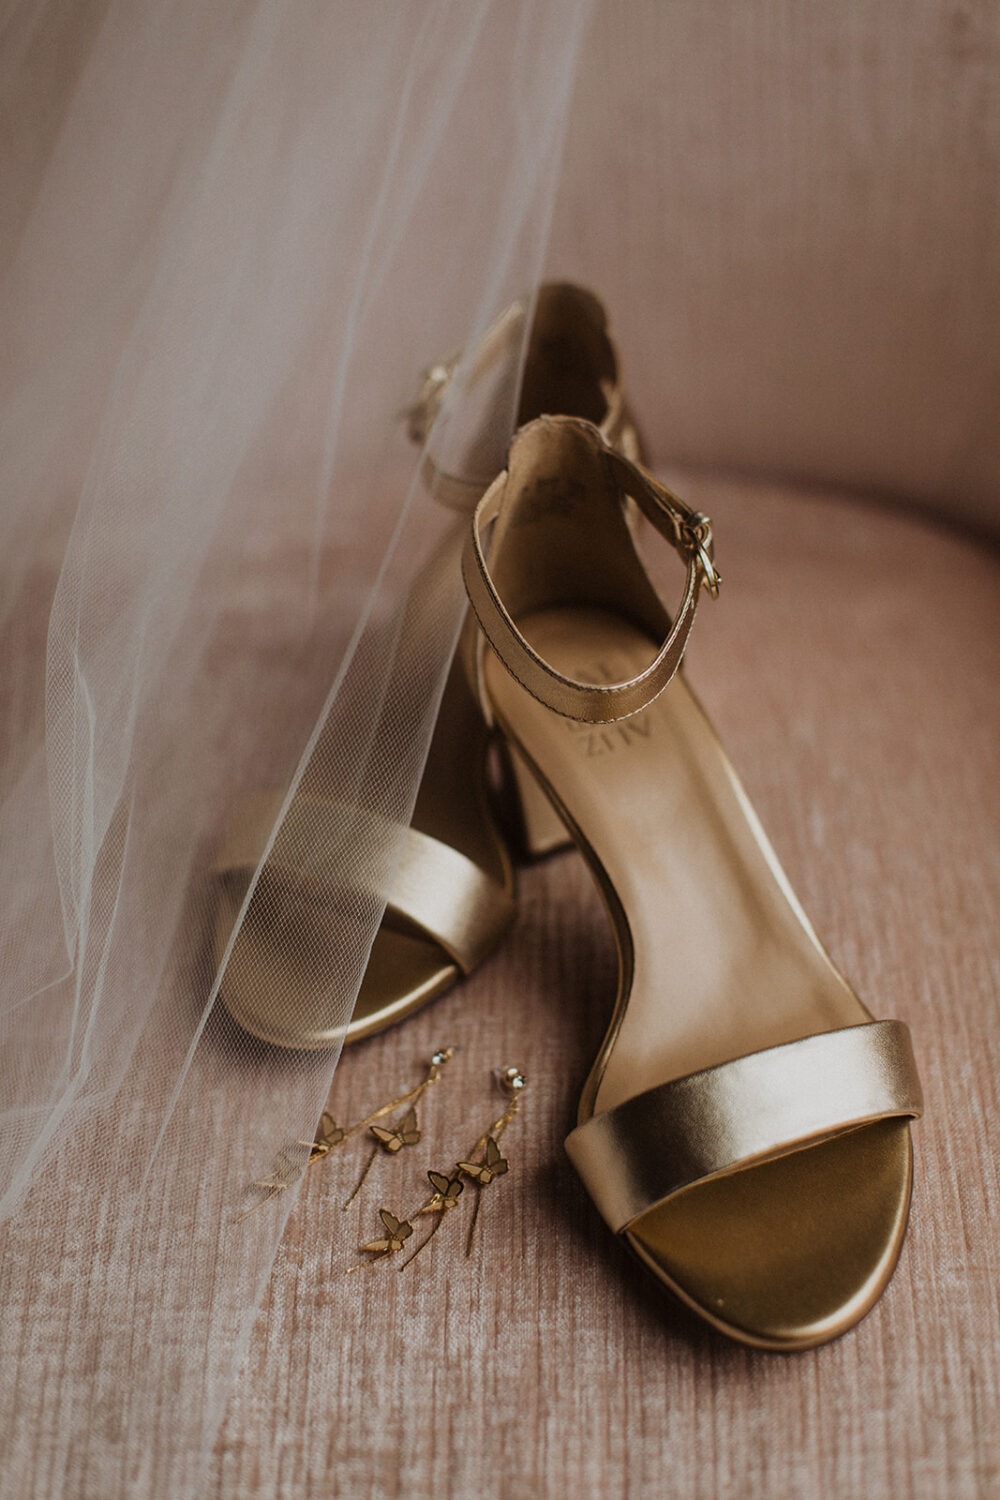 gold shoes and earrings under wedding veil